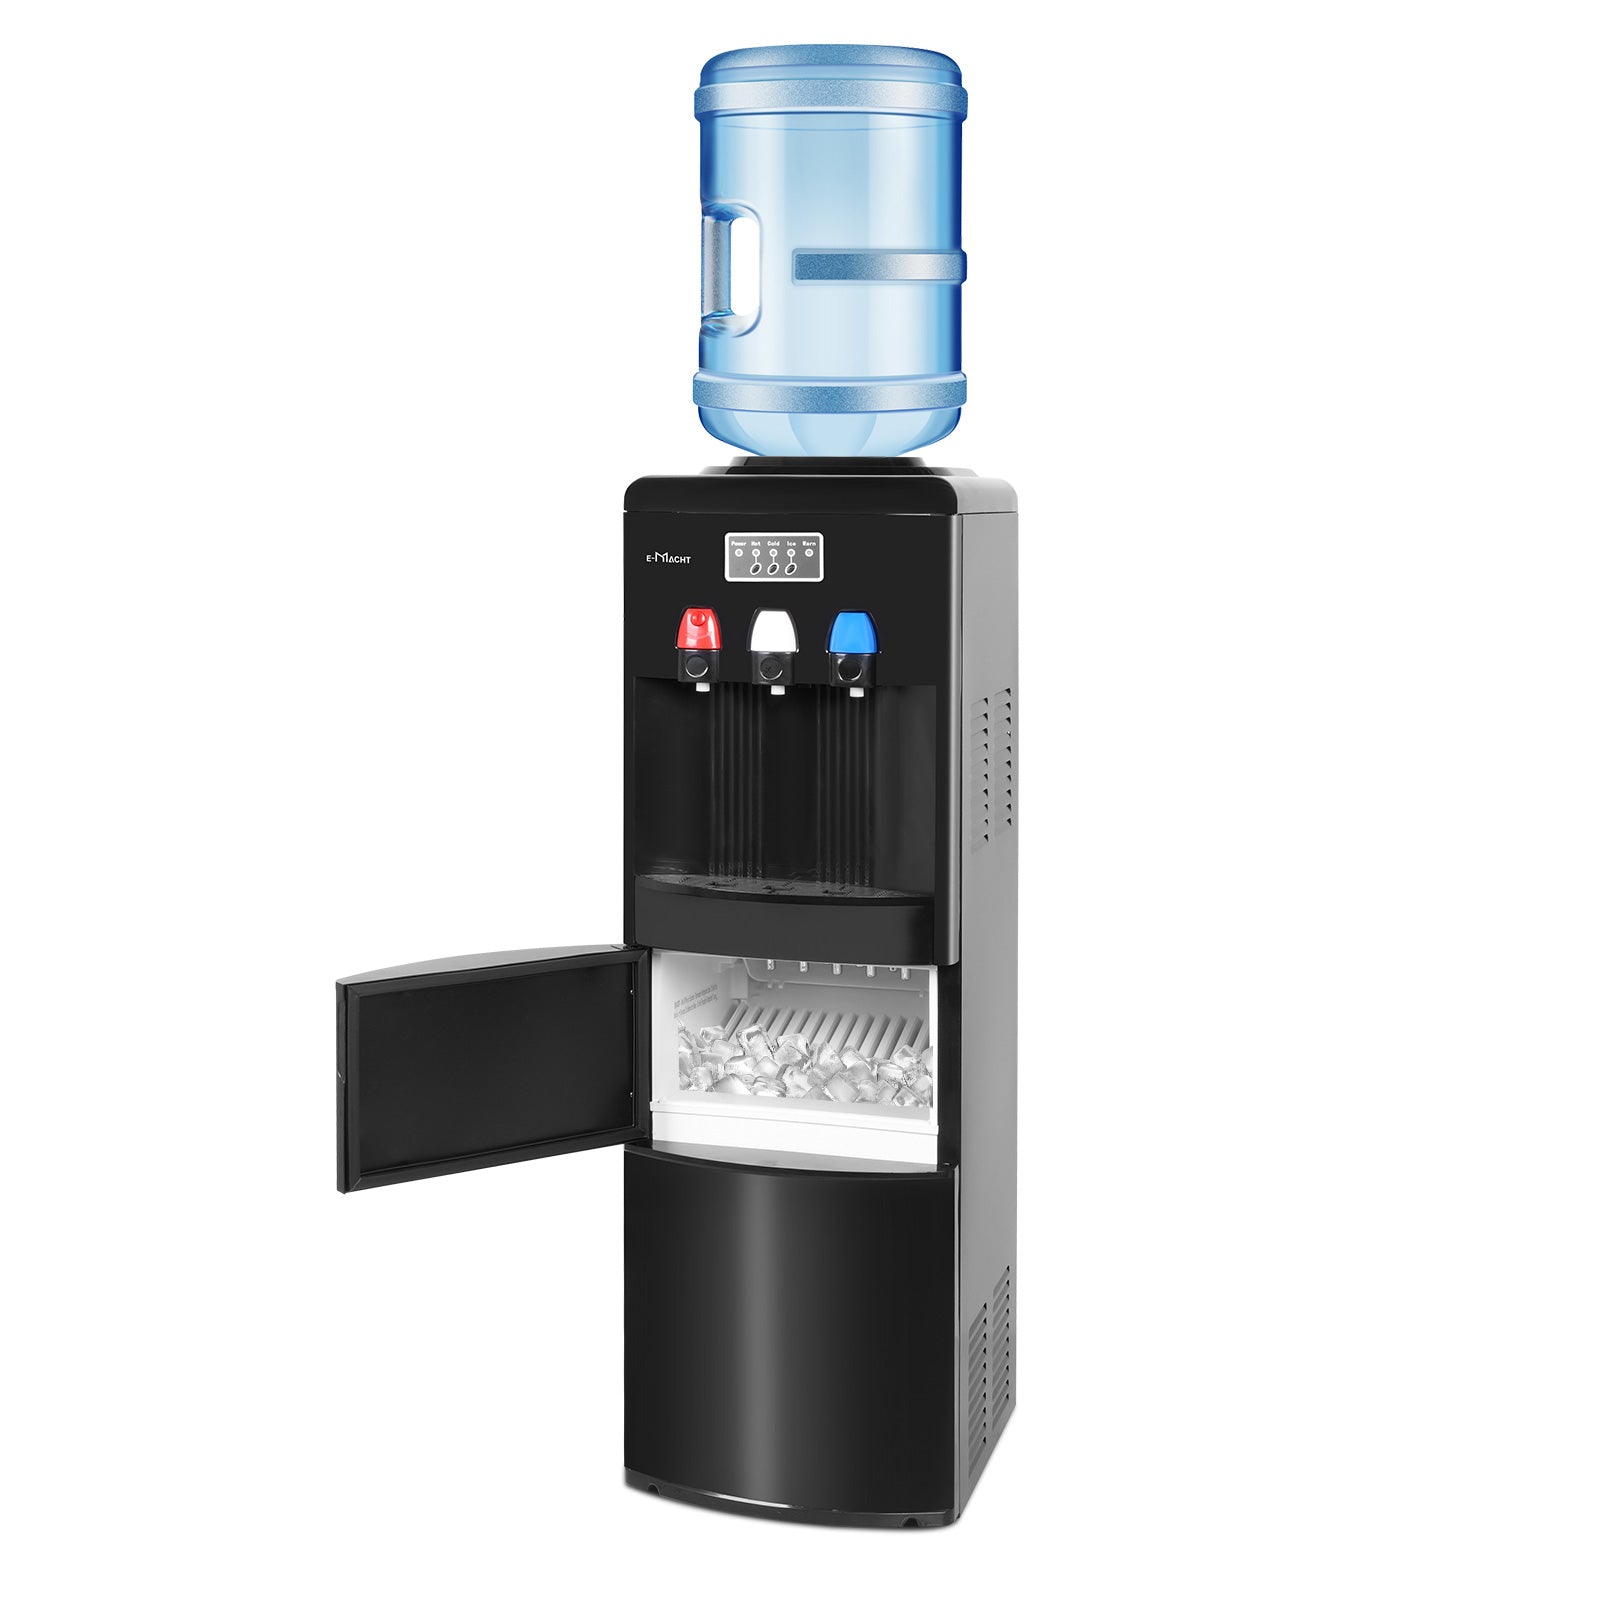 Luckyermore 2 in 1 Water Cooler Dispense for 3-5 Gallon Bottle with Scoop, Ice Maker, Child Safety Lock, Black  